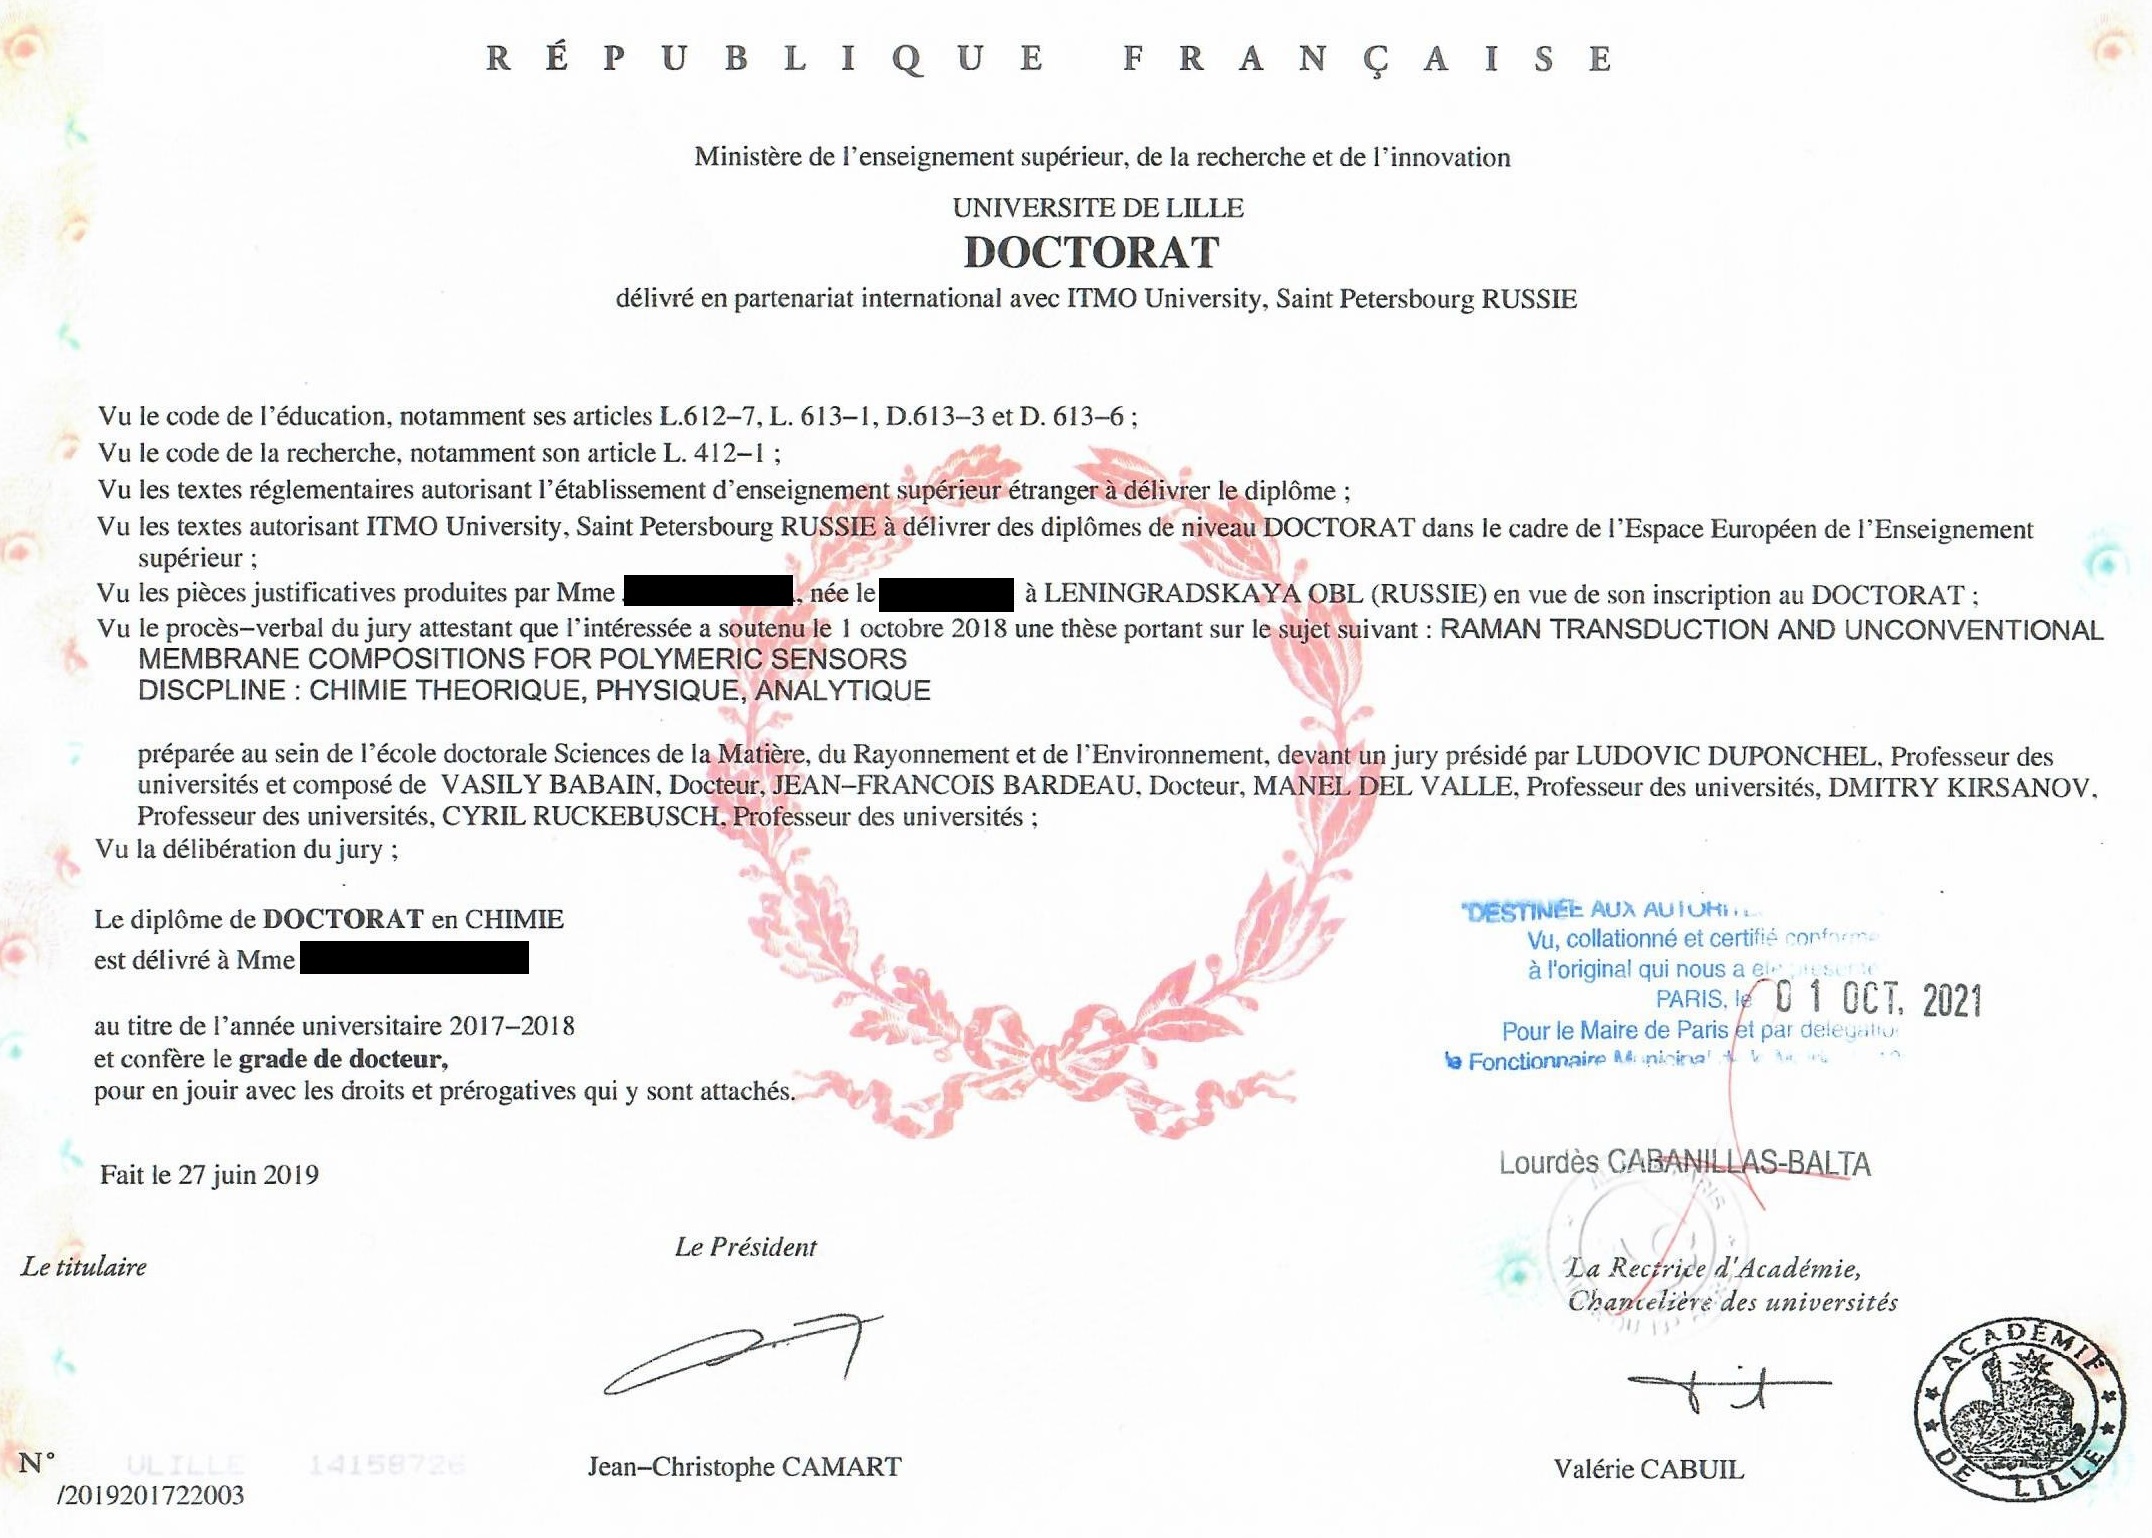 Sample diploma from France